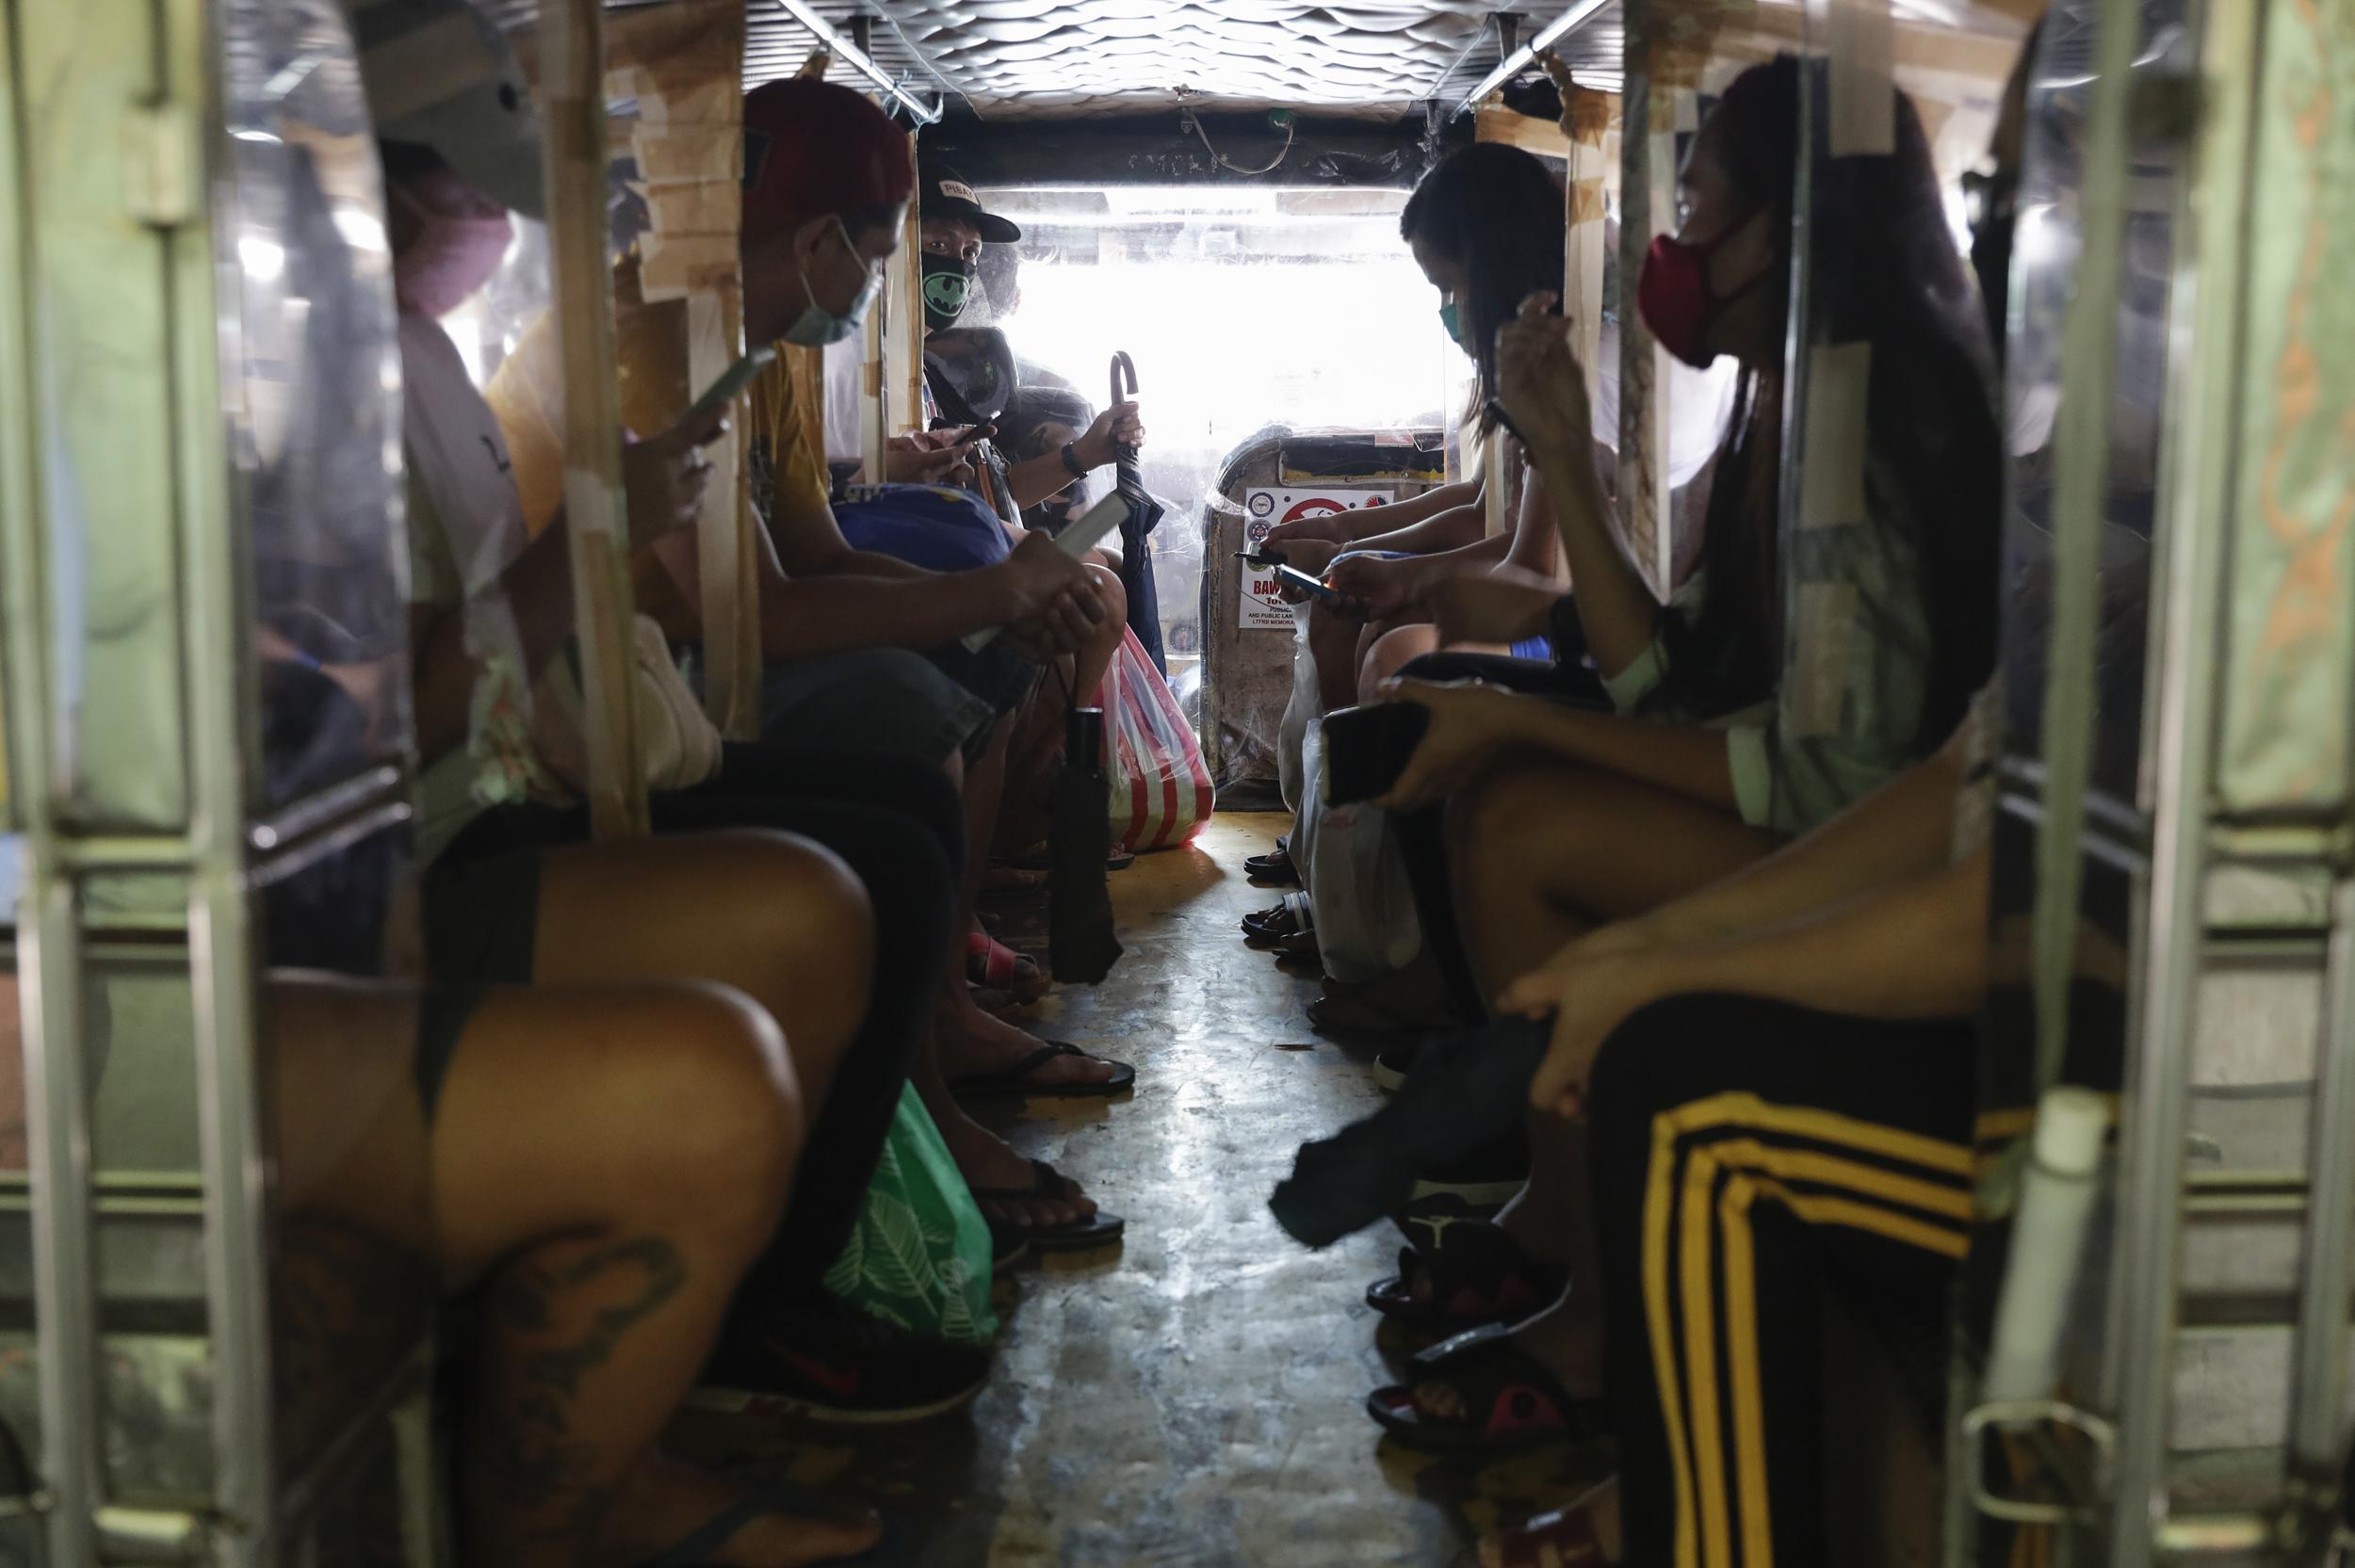 Passengers of a jeepney bus are separated by plastic sheets to help curb the spread of Covid-19